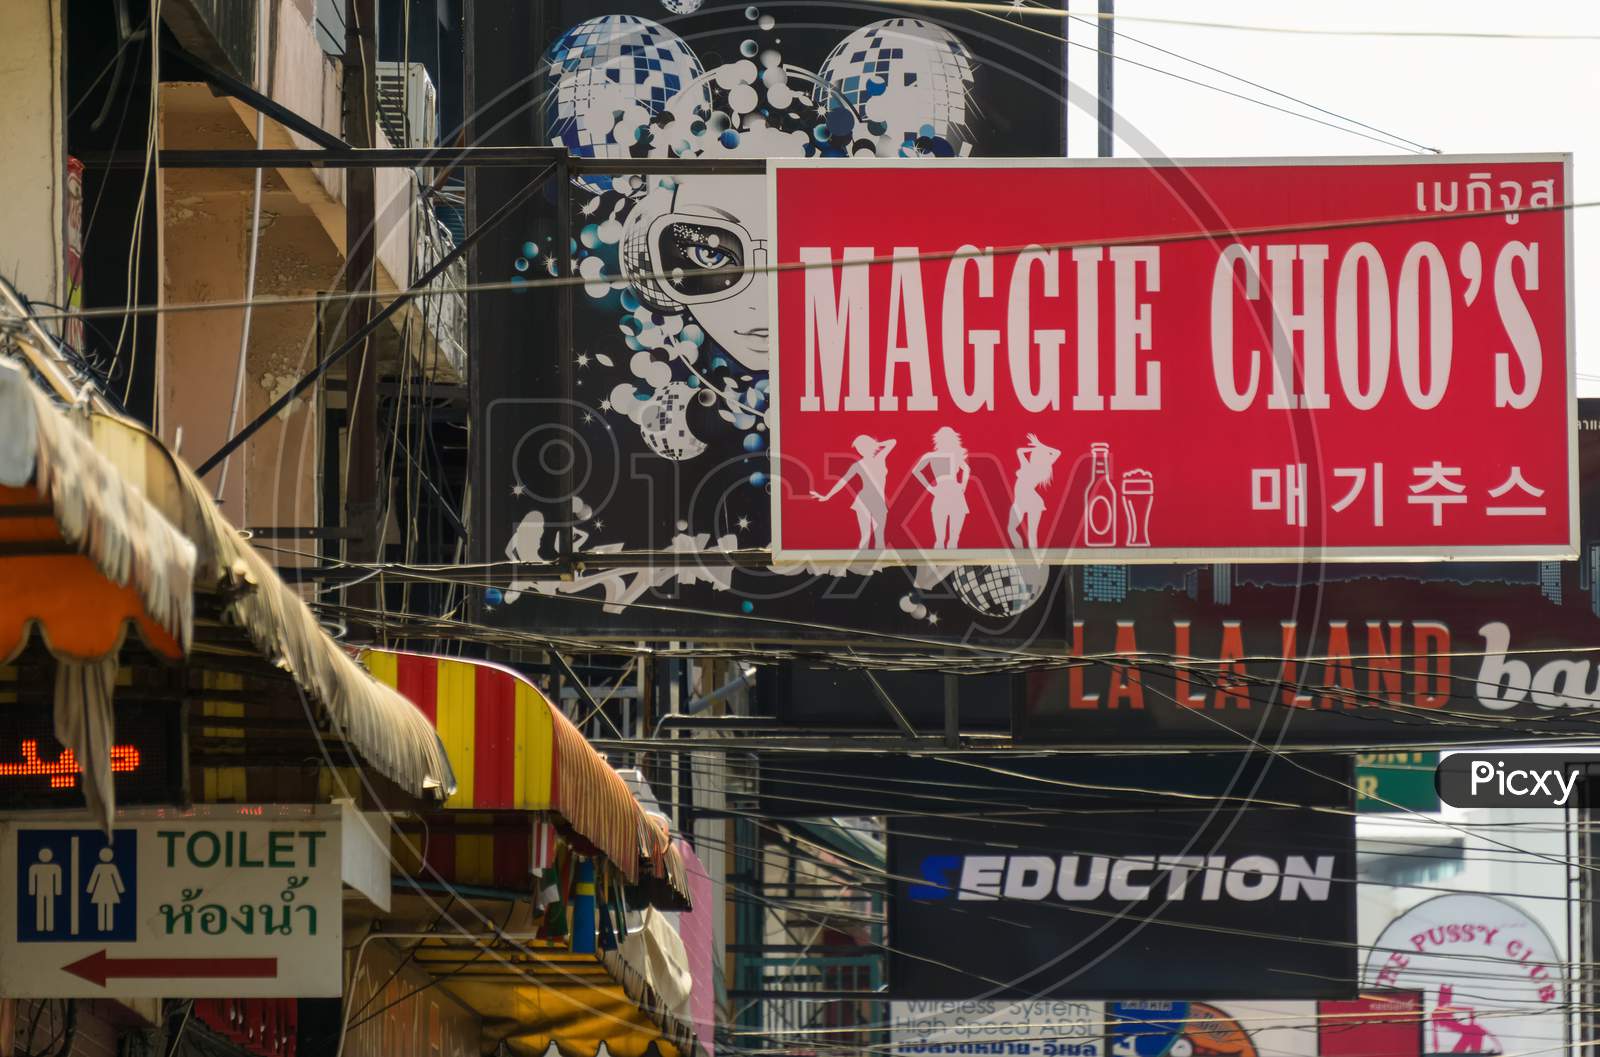 Pattaya,Thailand - April 11,2019:Soi 6 This Is The Sign Of Maggie Choo'S A New Bar,Which Seems To Be Mainly For Guests From China.